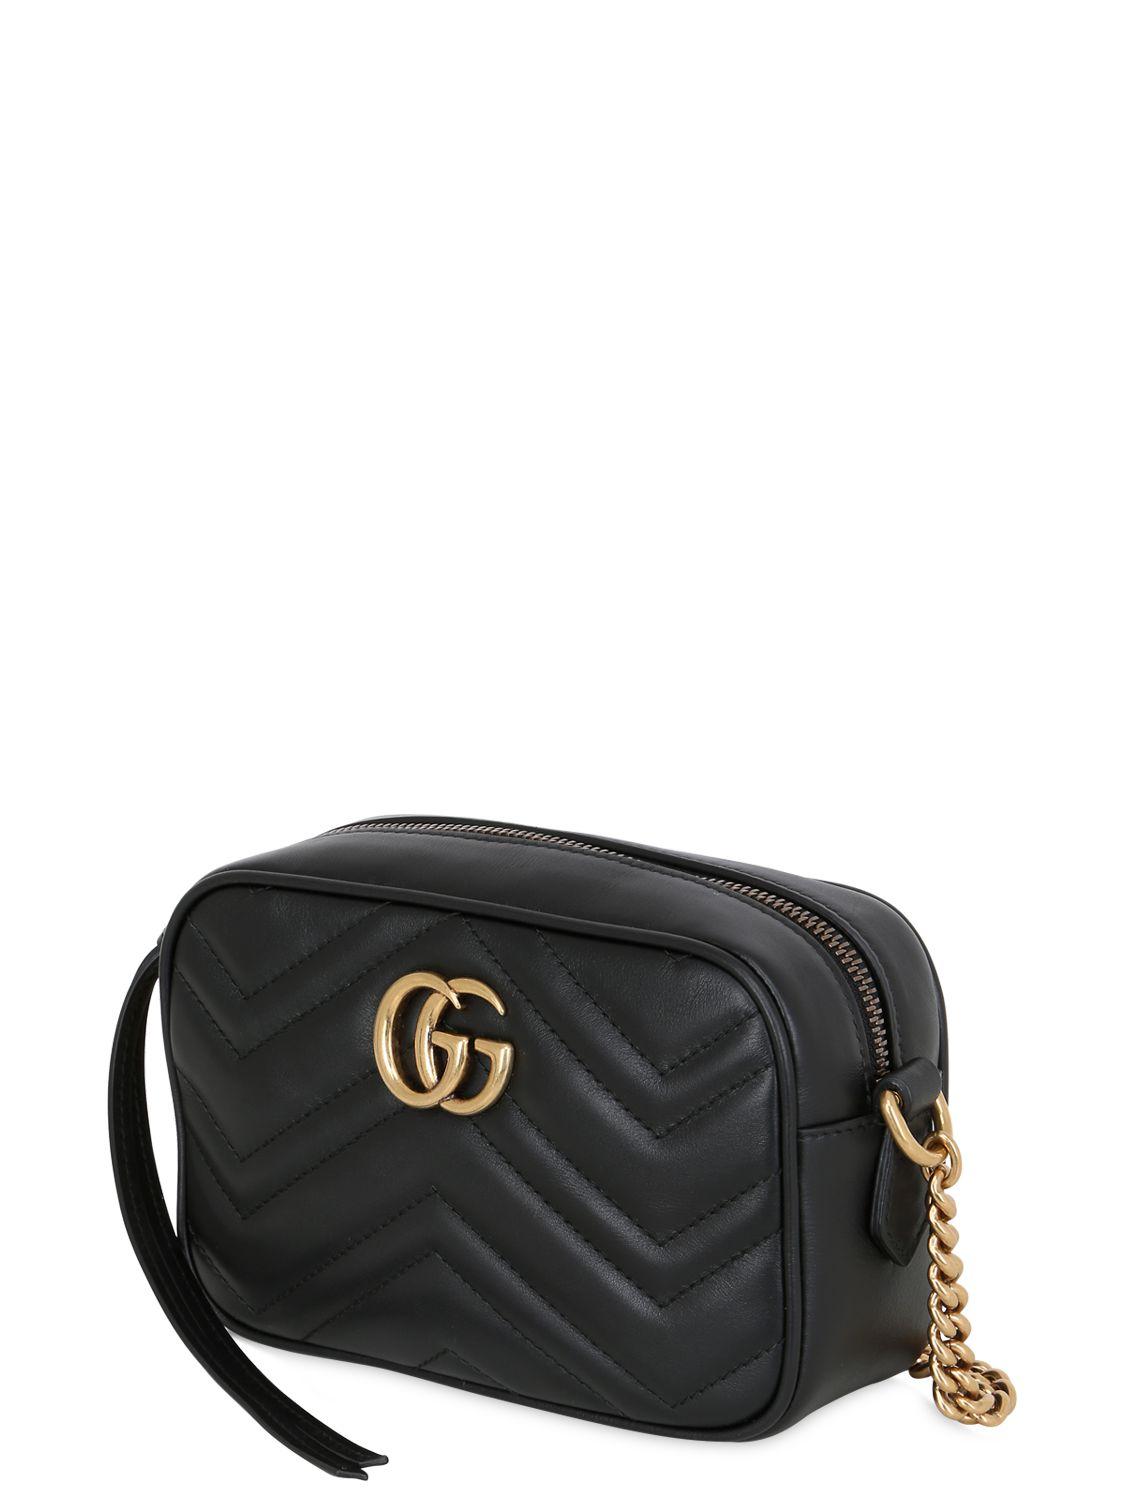 Gucci Mini Gg Marmont 2.0 Leather Bag in Black - Lyst